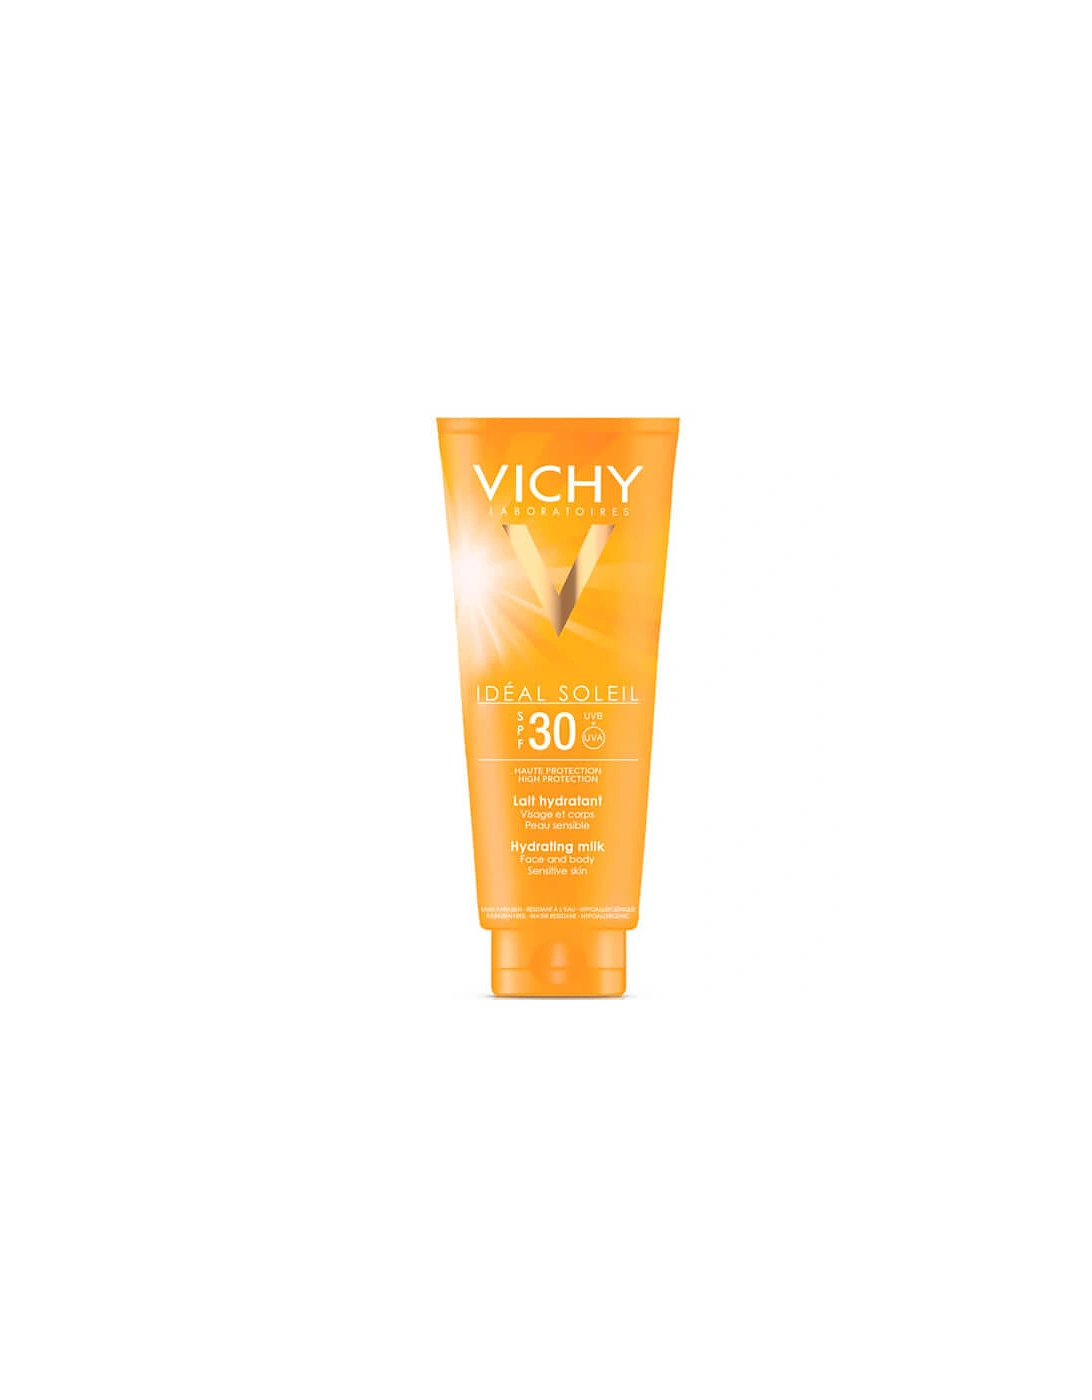 Idéal Soleil Sun-Milk for Face and Body SPF 30 300ml - Vichy, 2 of 1